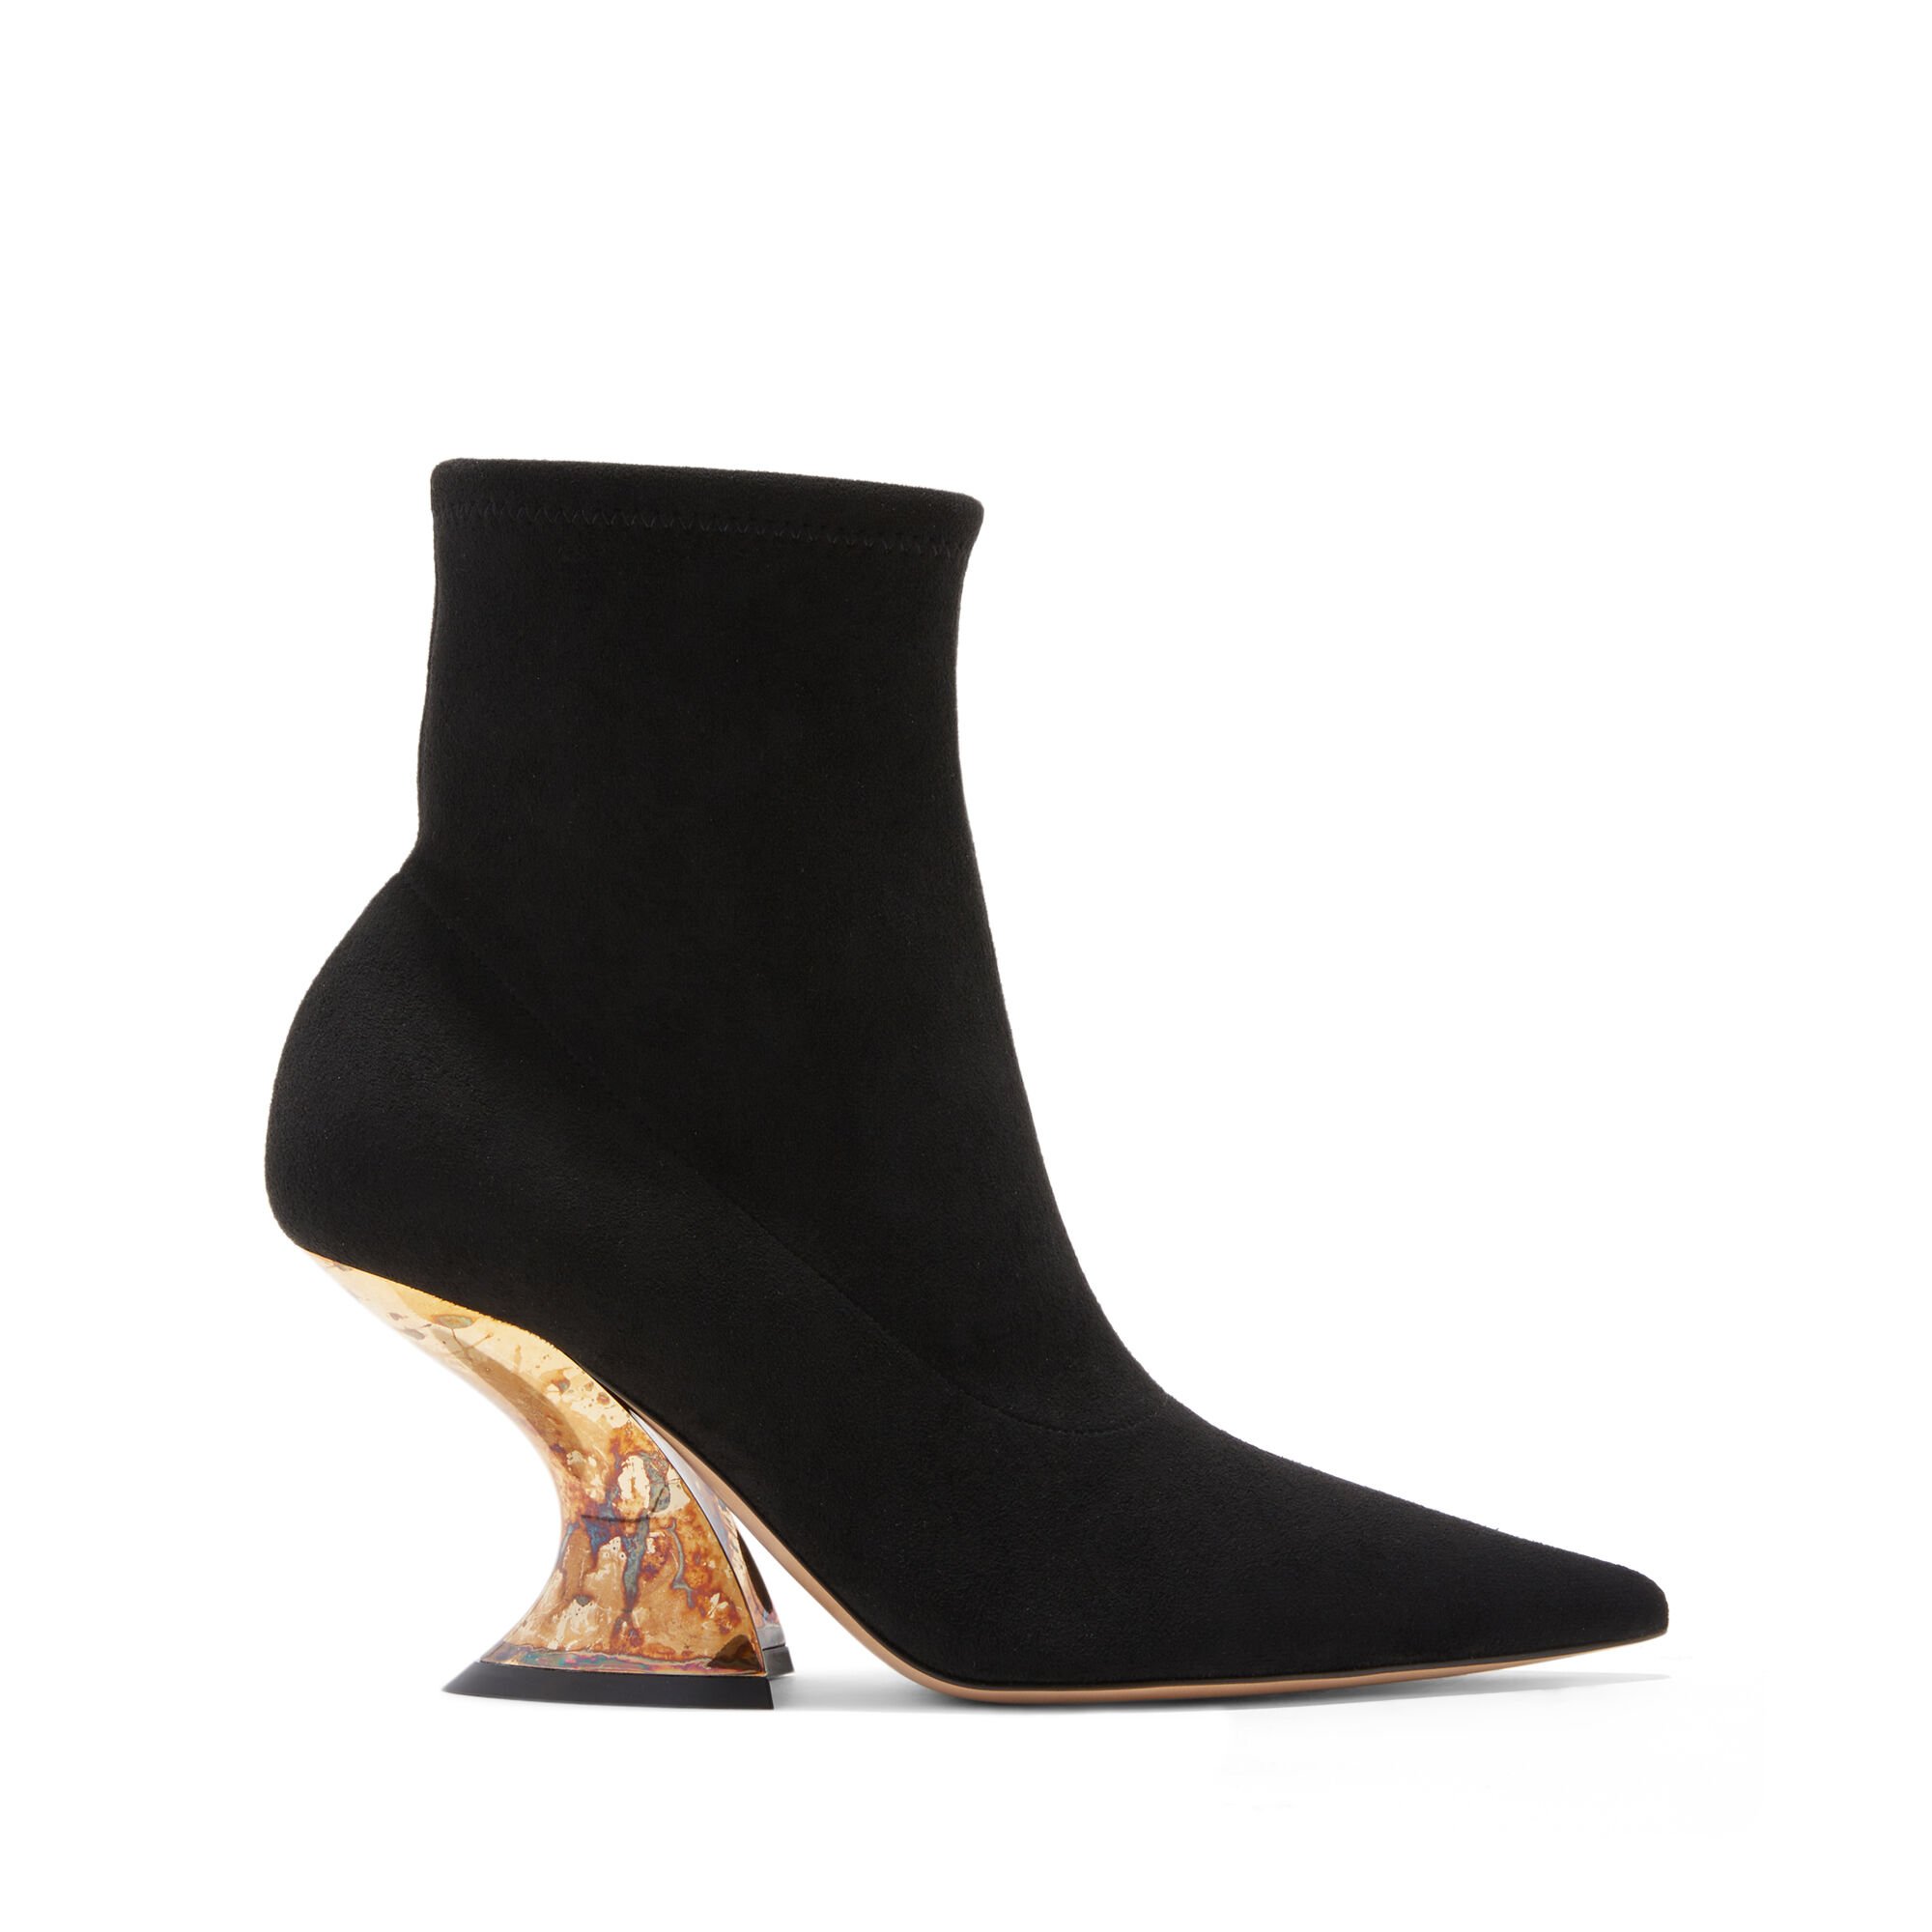 Herlipto cambon ankle boots プレゼントを選ぼう！ - clinicaviterbo